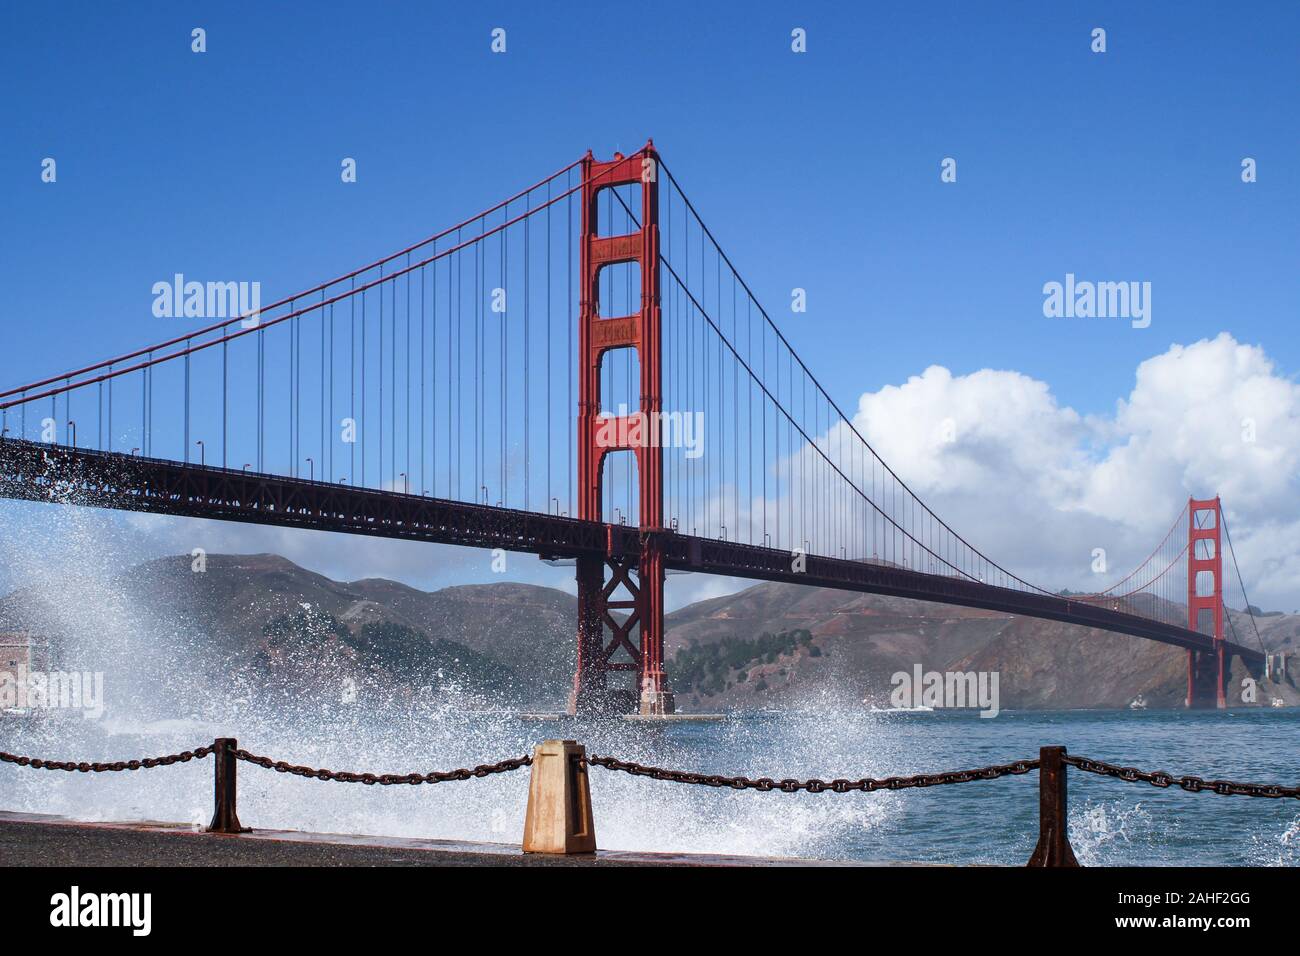 Waves breaking on to the embankment with international orange Golden Gate Bridge in San Francisco, United States of America Stock Photo